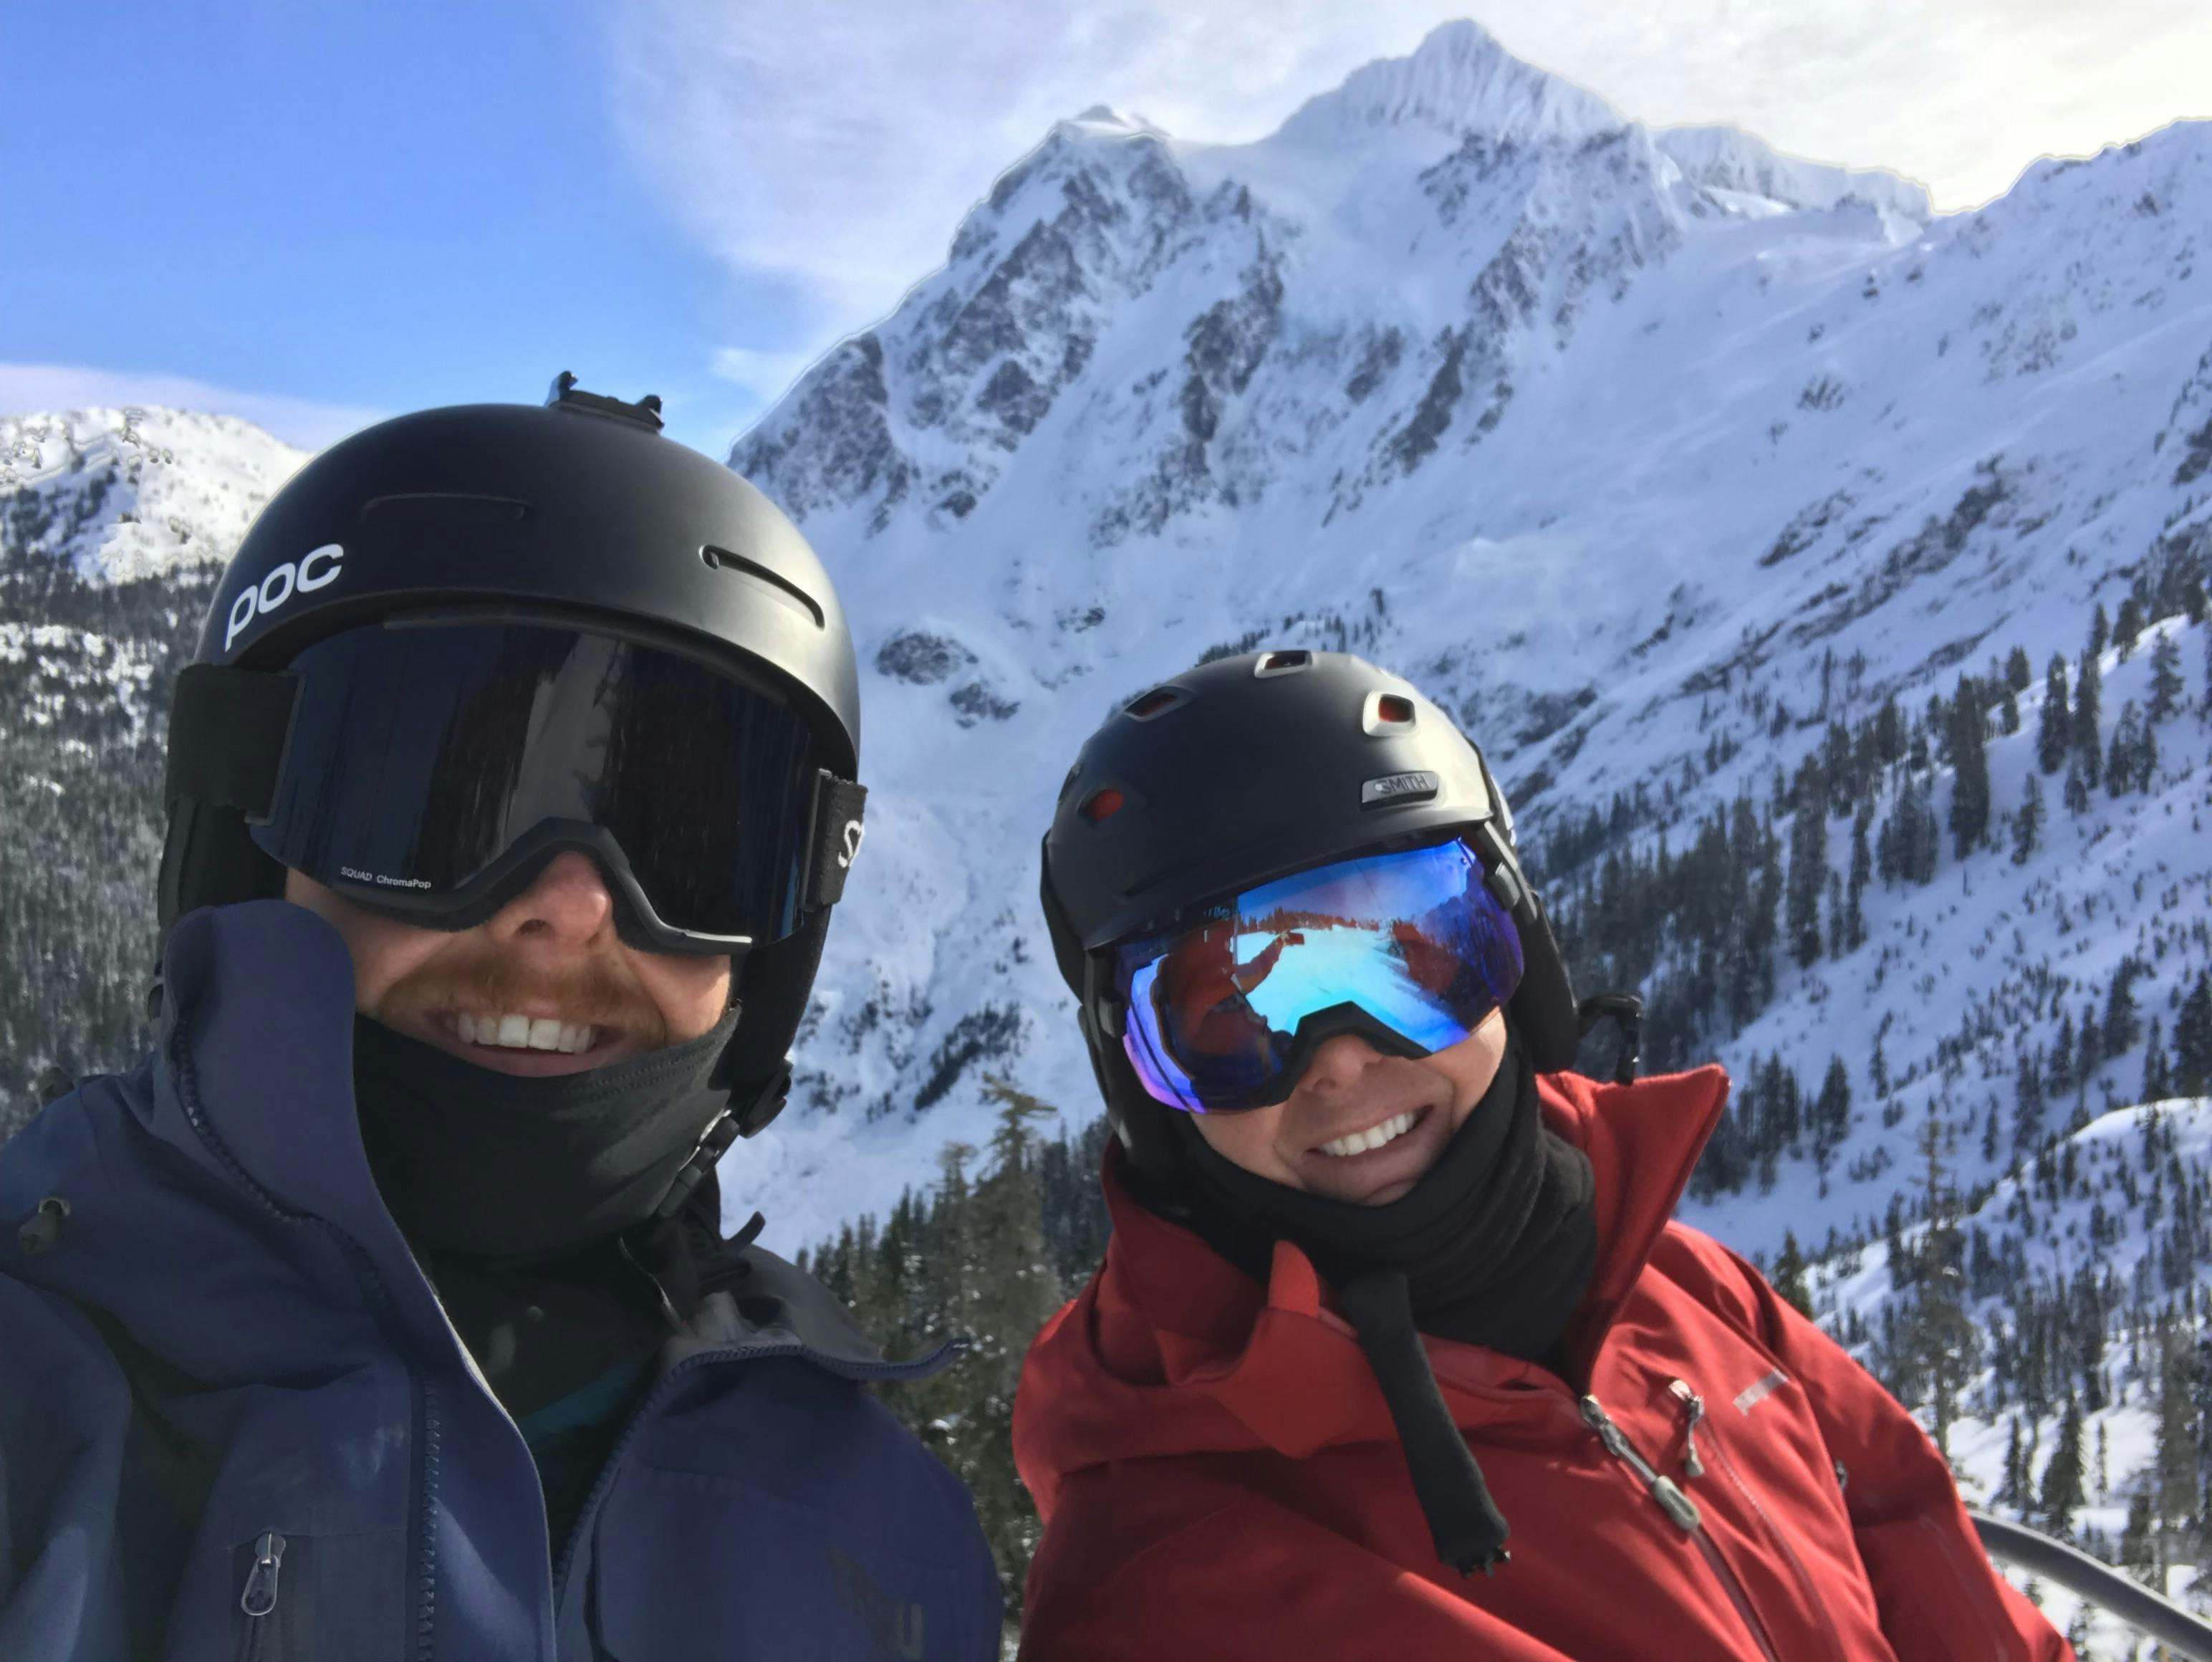 Two skiers, one with a very dark lens and the Smith Squad goggles. There is a snowy mountain range in the background.